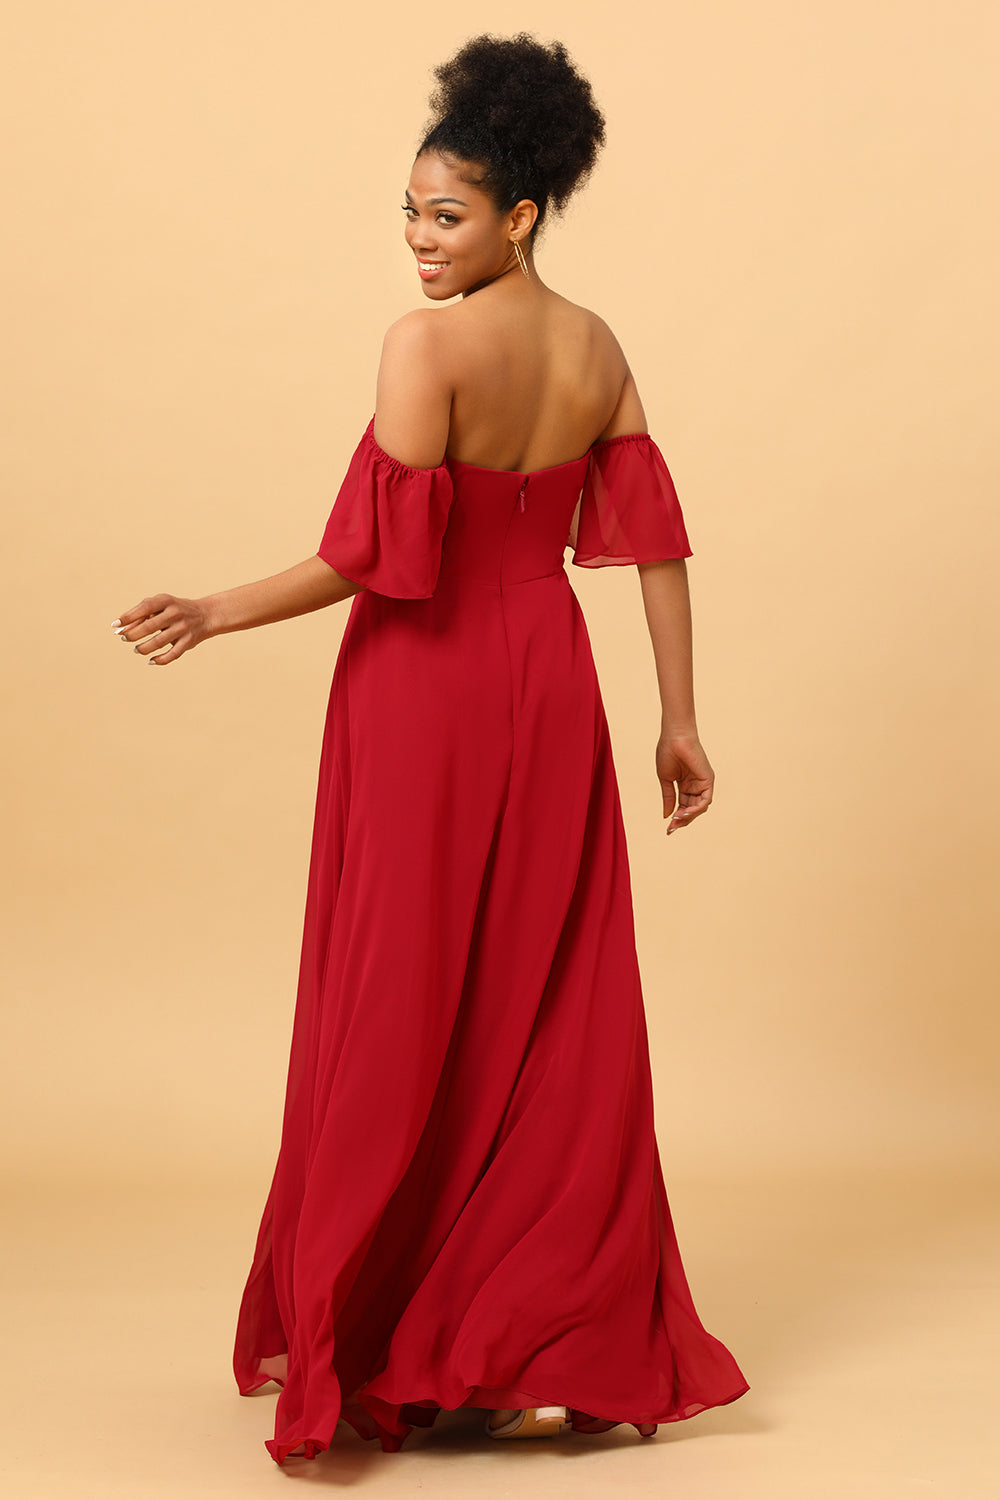 Burgundy off the Shoulder Long Chiffon Bridesmaid Dress with Slit